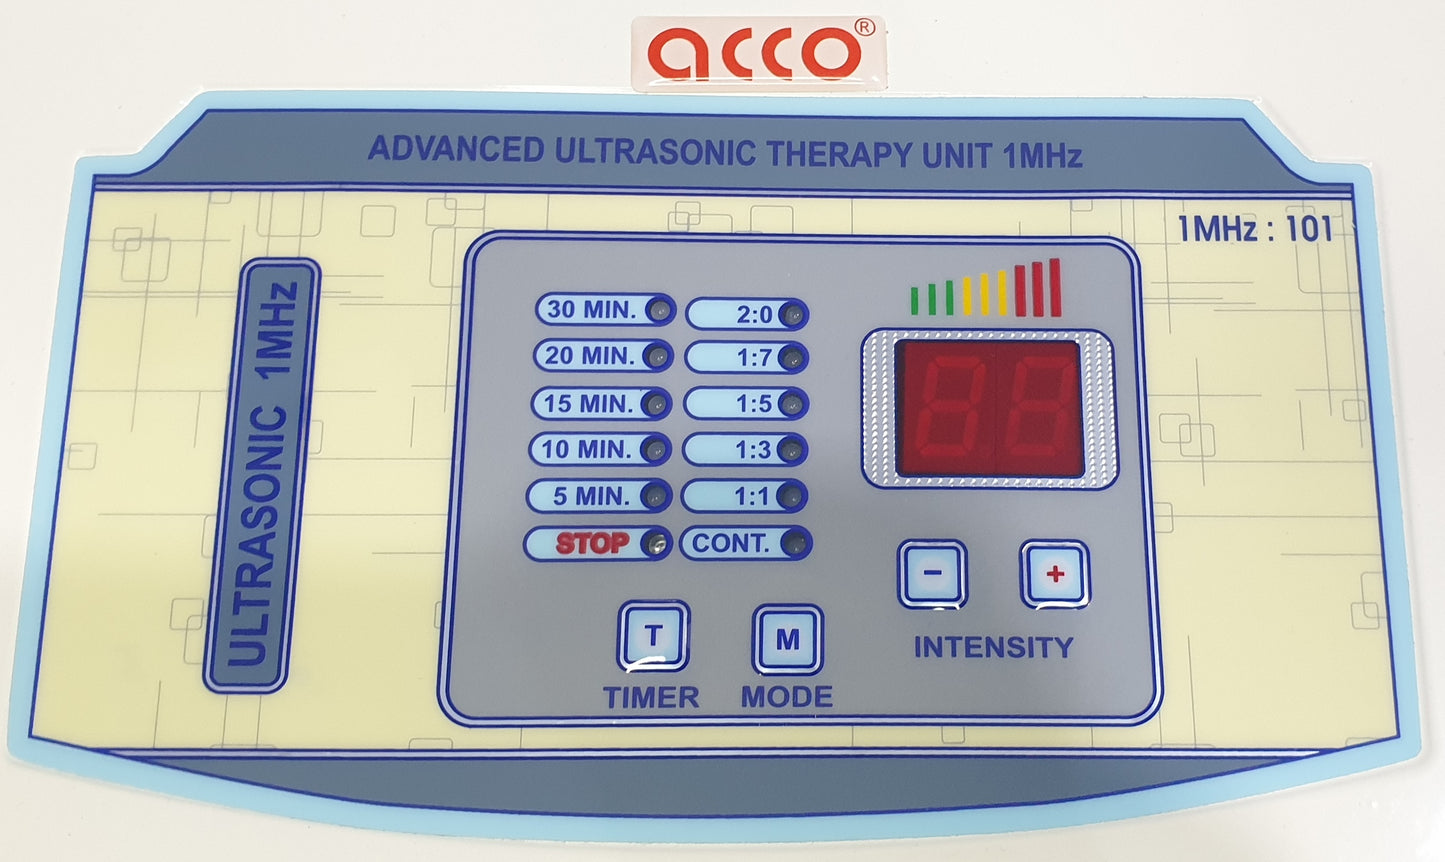 acco Ultrasound Therapy Machine 1 Mhz LED